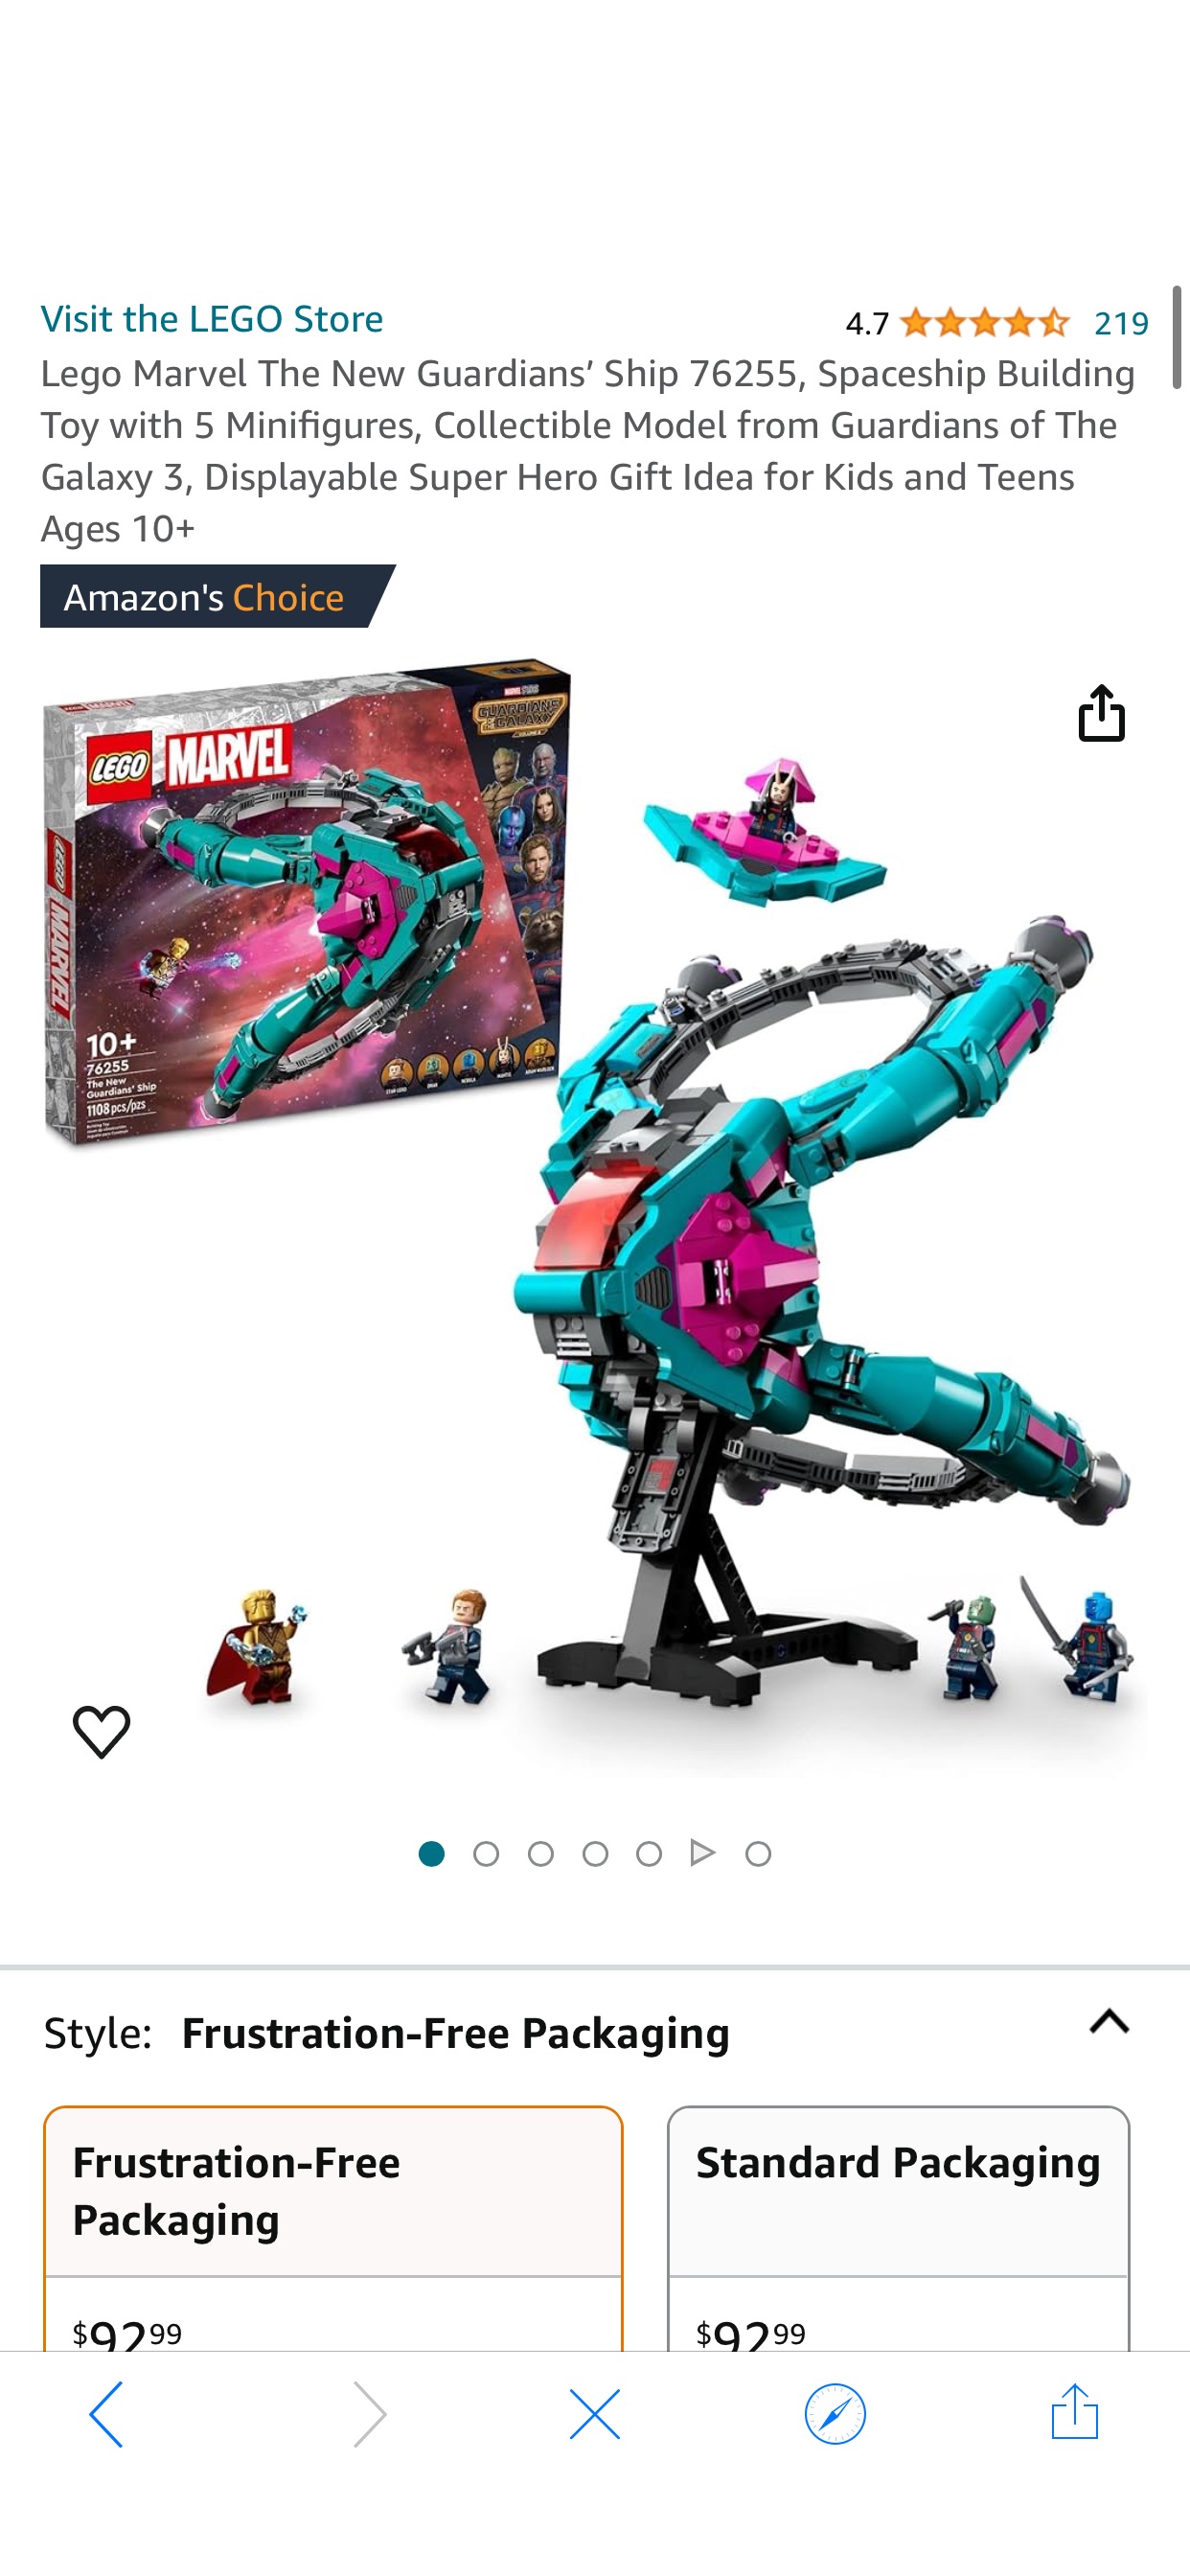 Amazon.com: Lego Marvel The New Guardians’ Ship 76255, Spaceship Building Toy with 5 Minifigures, Collectible Model from Guardians of The Galaxy 3, Displayable Super Hero Gift Idea for Kids and Teens 